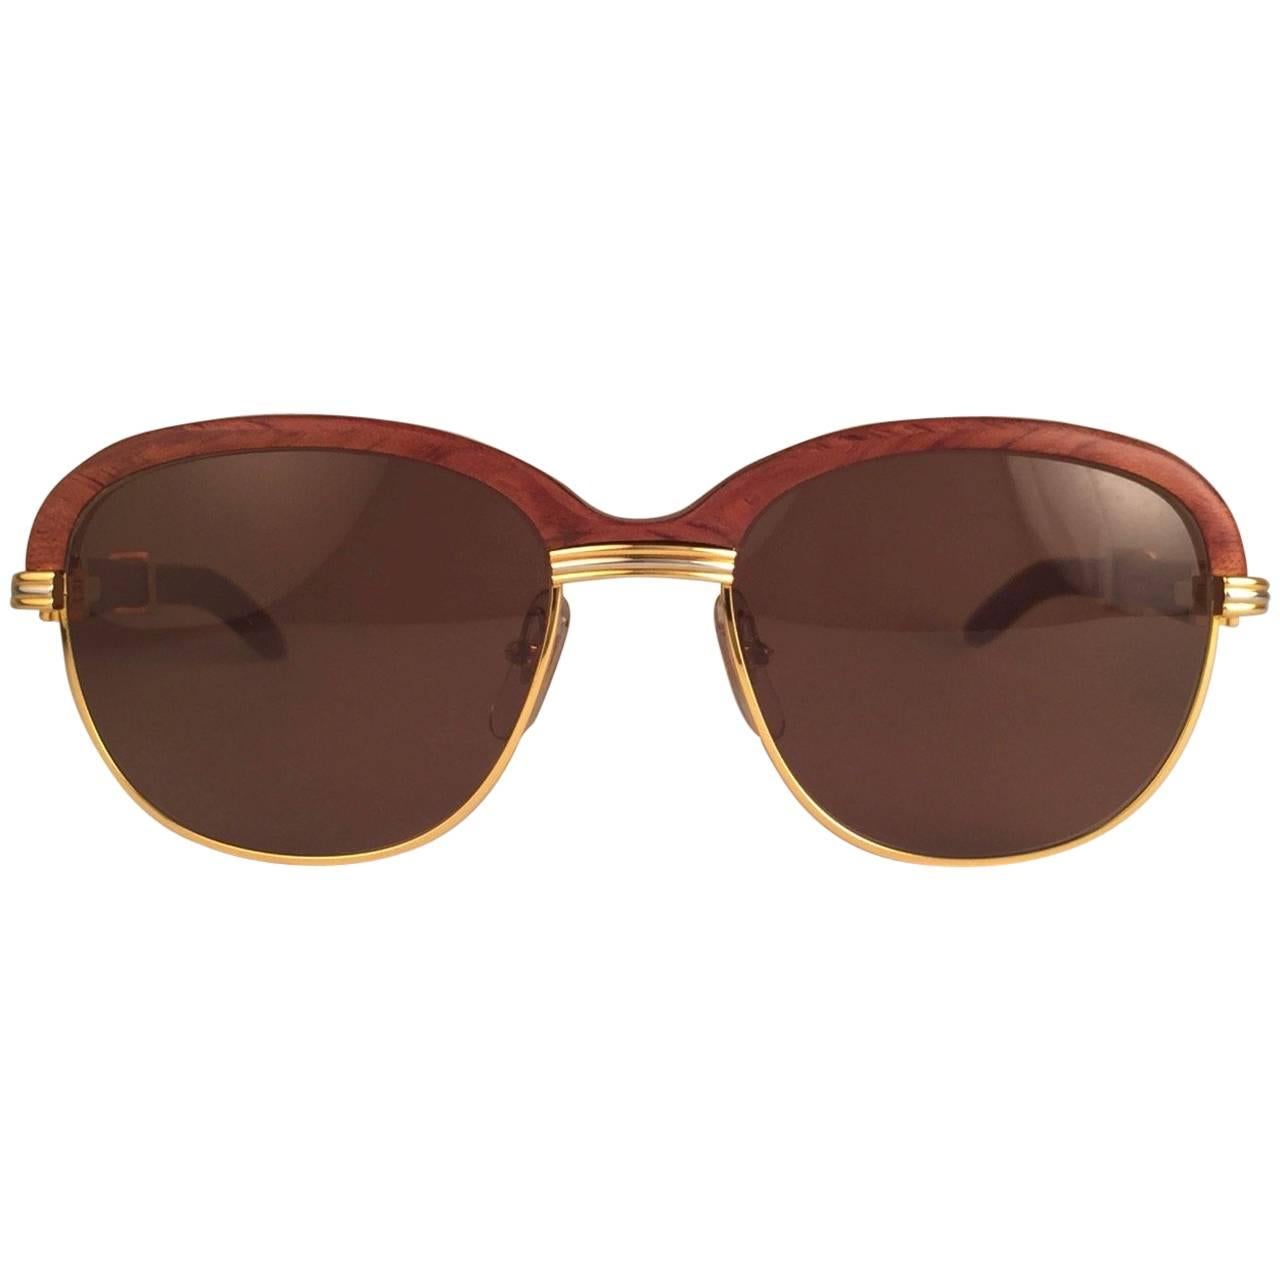 Original 1990 Cartier Malmaison hardwood sunglasses with honey brown(uv protection) lenses. 
Front and sides in yellow and white gold and has the famous wooden front. Temples are also Palisander combined with gold. 
Amazing craftsmanship! All